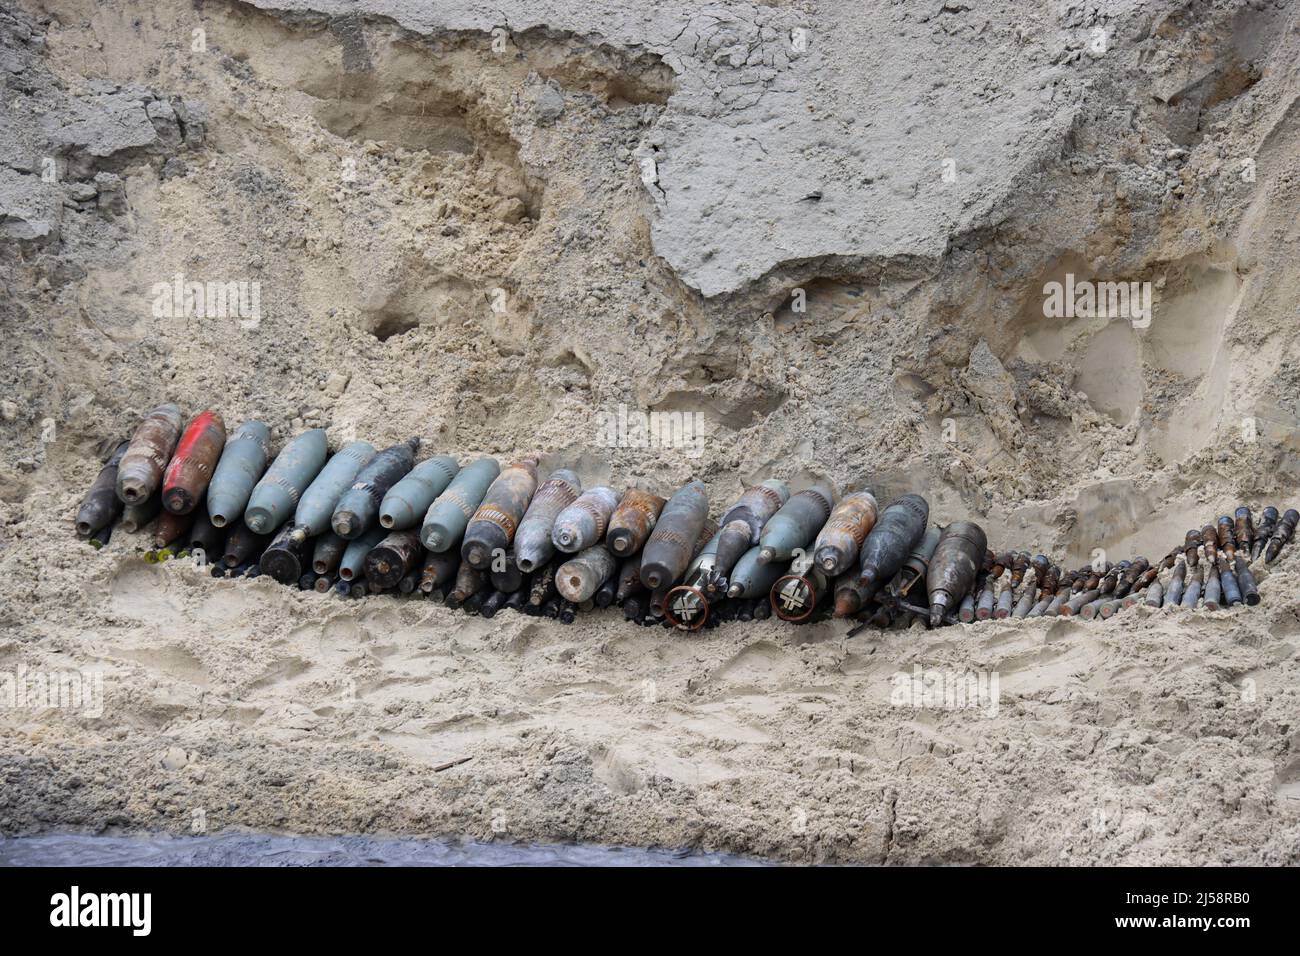 KYIV REGION, UKRAINE - APRIL 20, 2022 - Shells are pilled on the ground during the disposal of ammunition collected in the territories liberated from Stock Photo